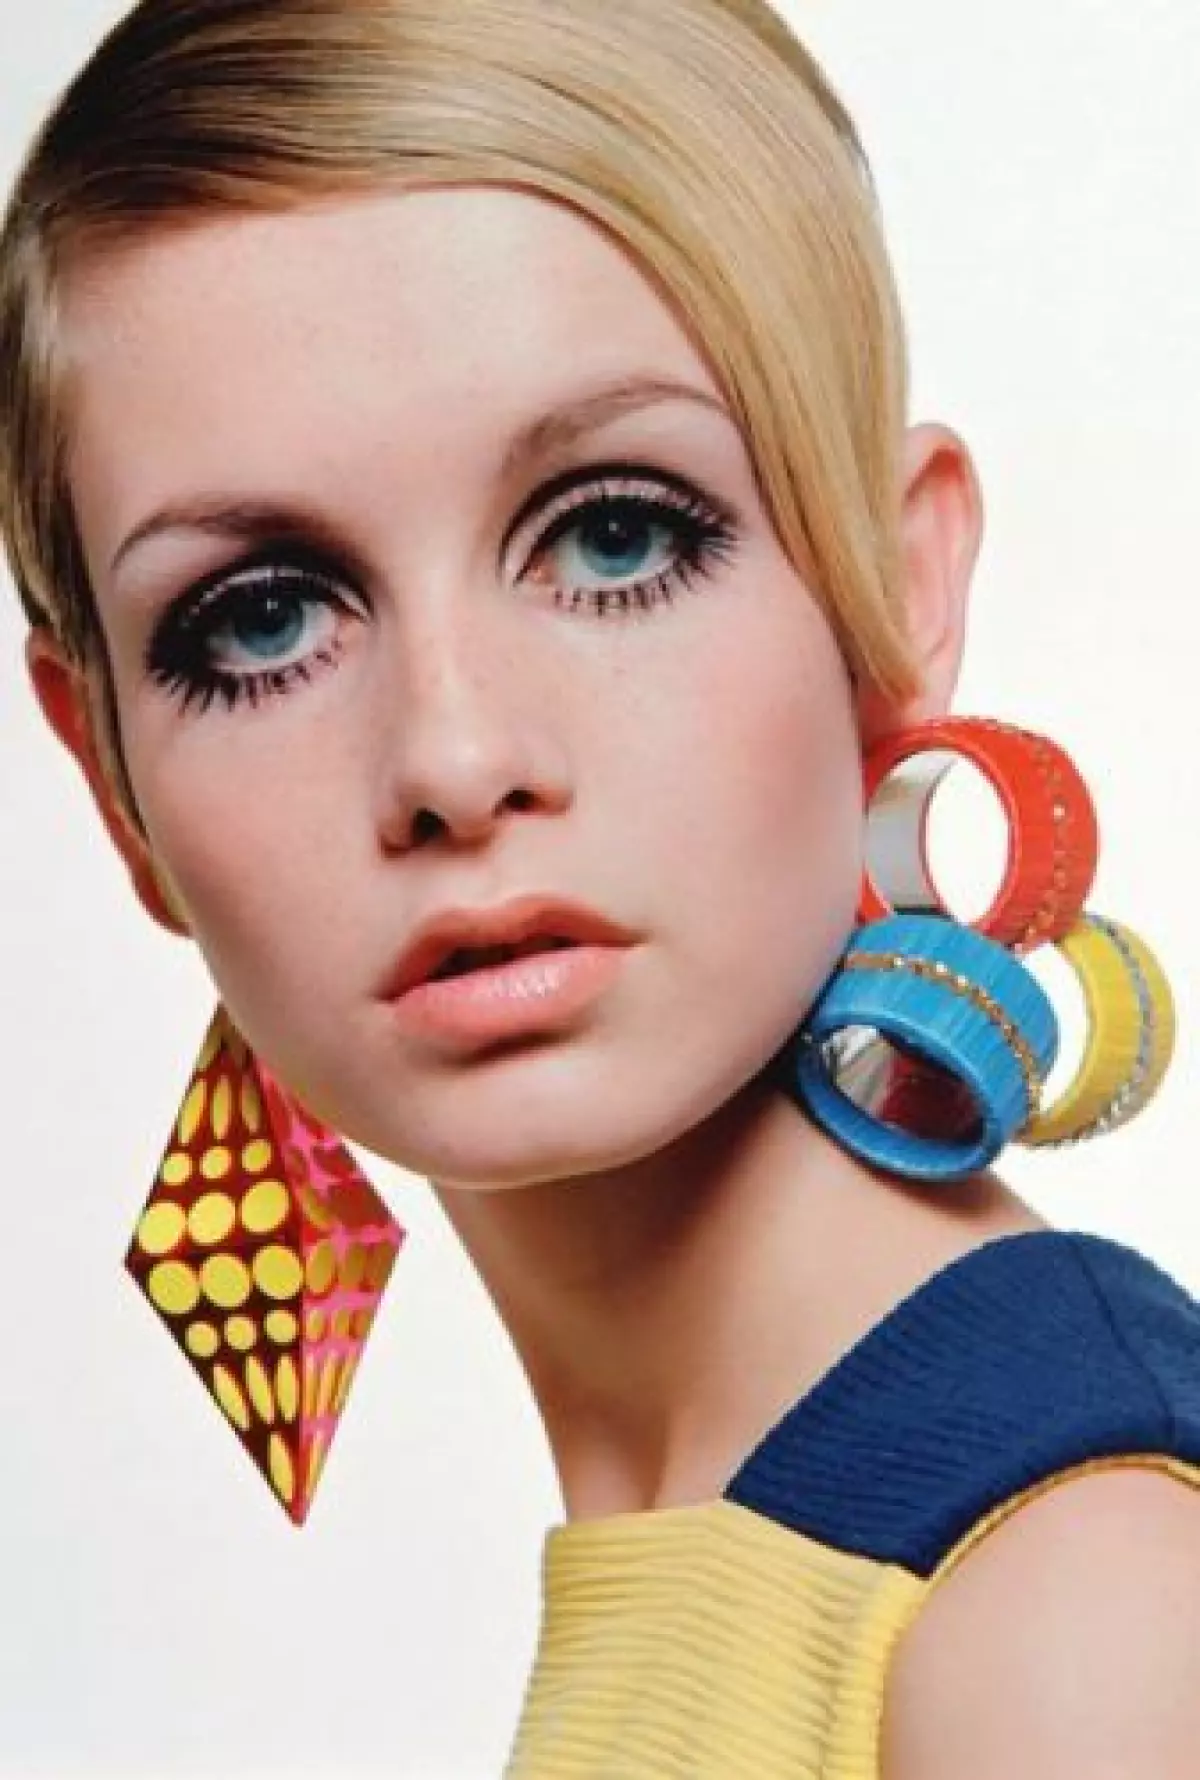 Retro Jewelry And Accessories: Most Popular Looks For the 1960s